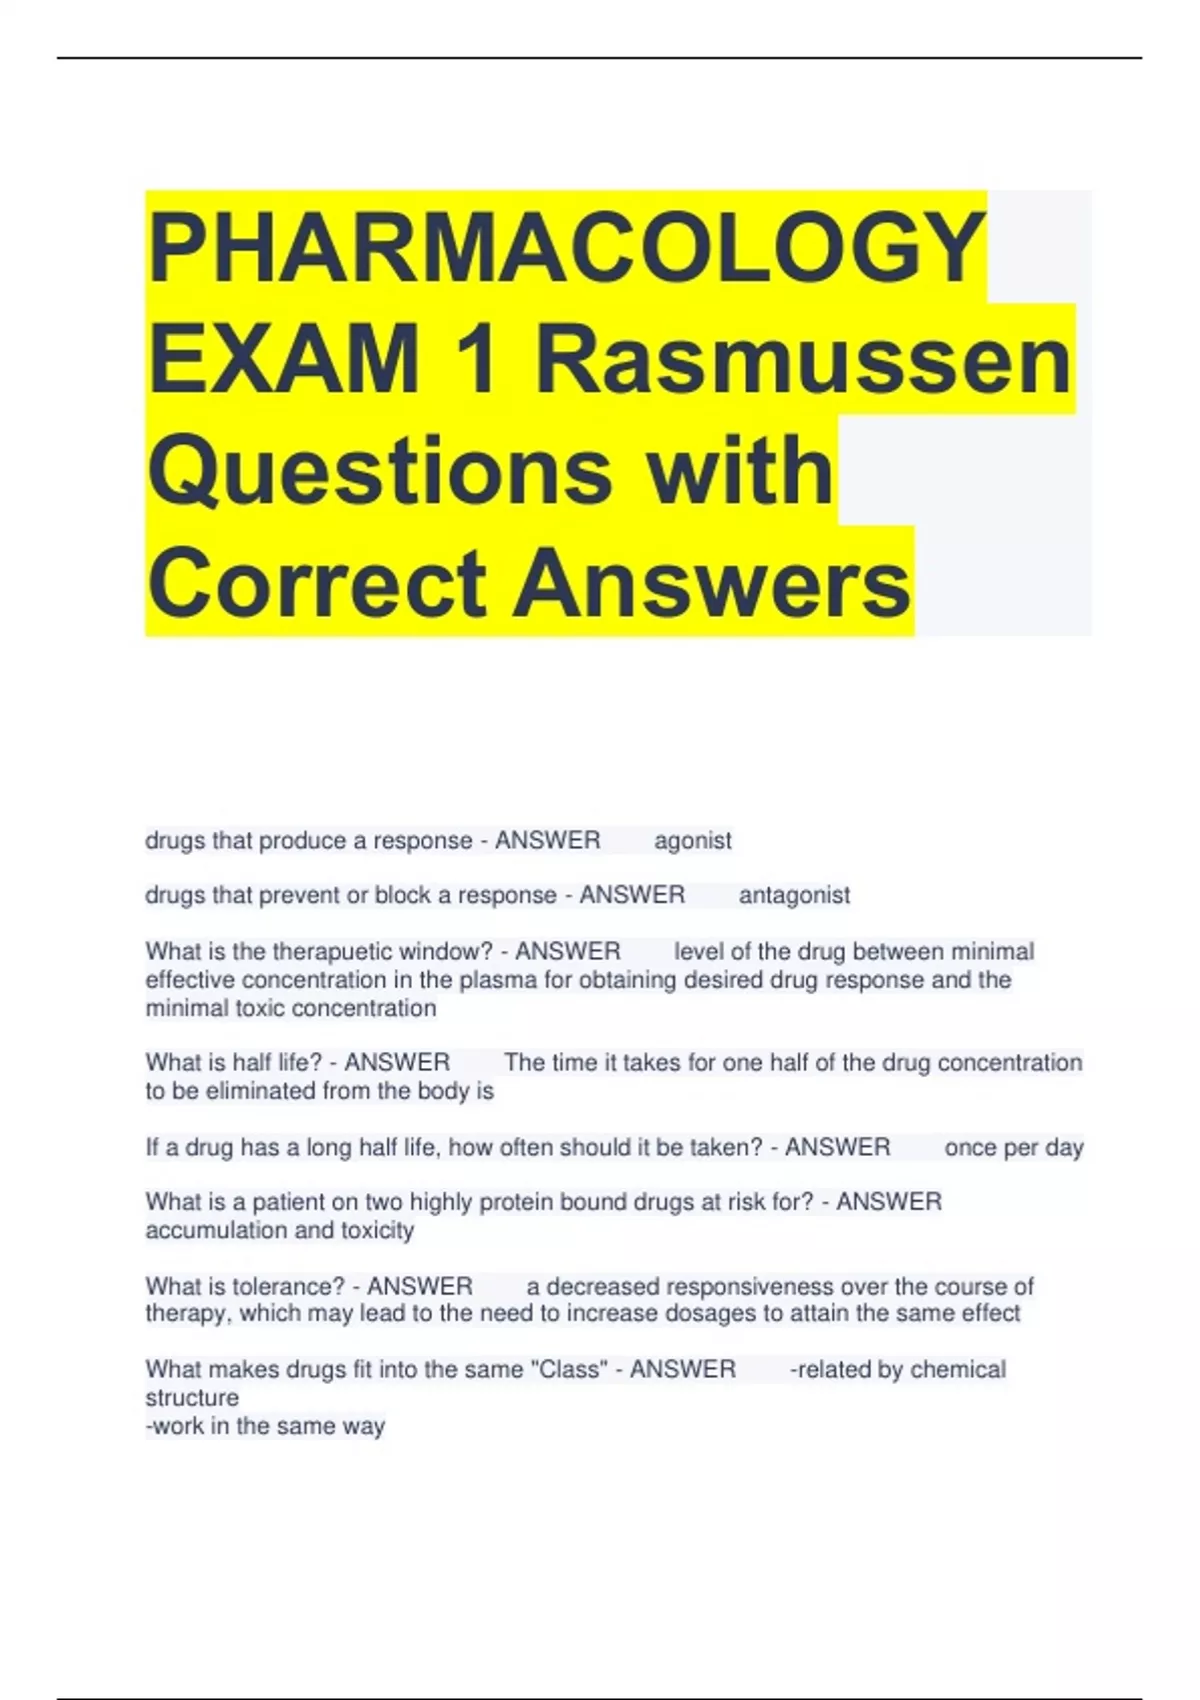 PHARMACOLOGY EXAM 1 Rasmussen Questions with All Correct Answers